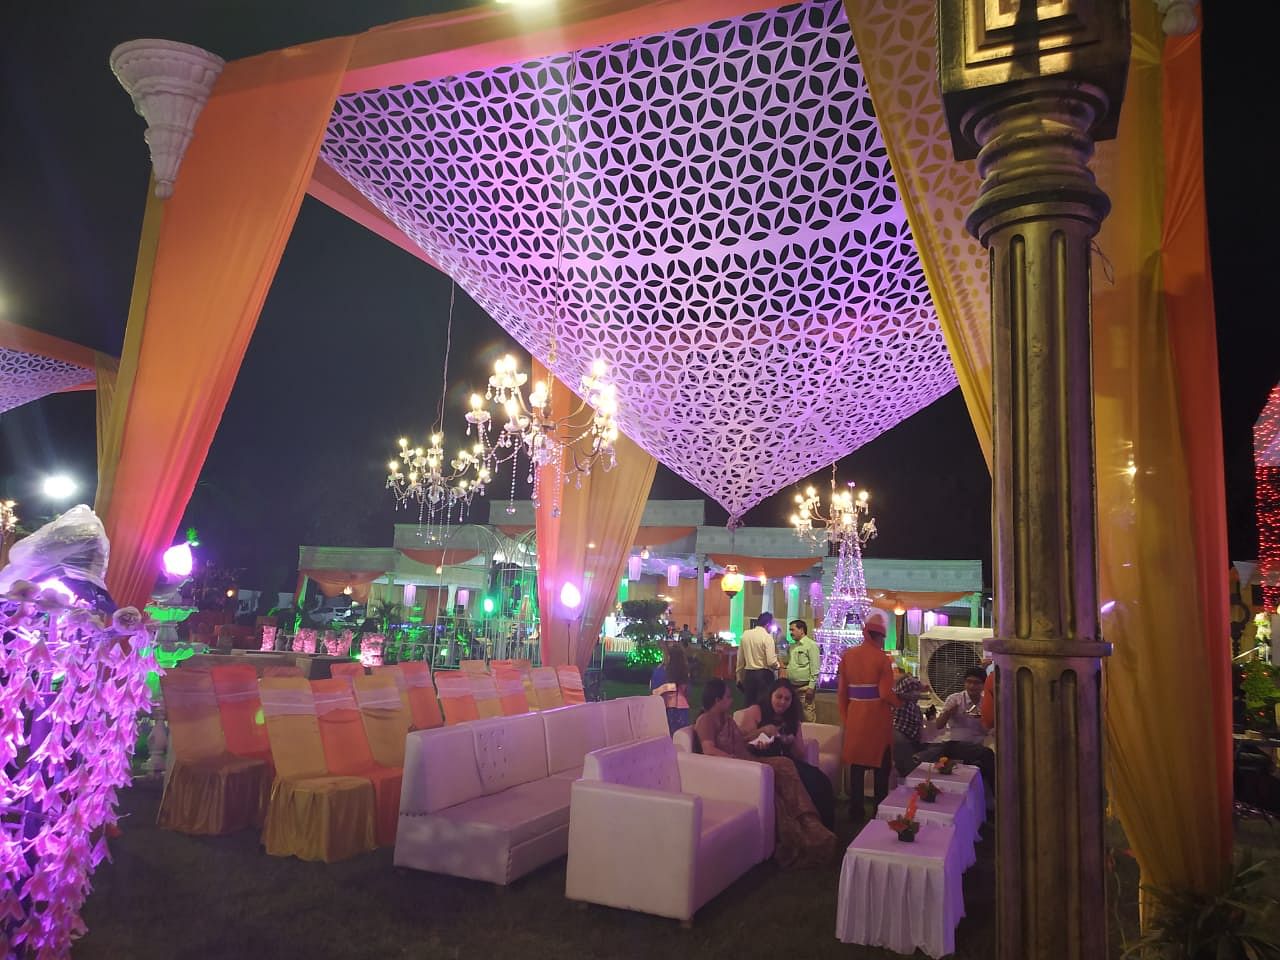 Umang The Party Lawn in Deva Road, Lucknow